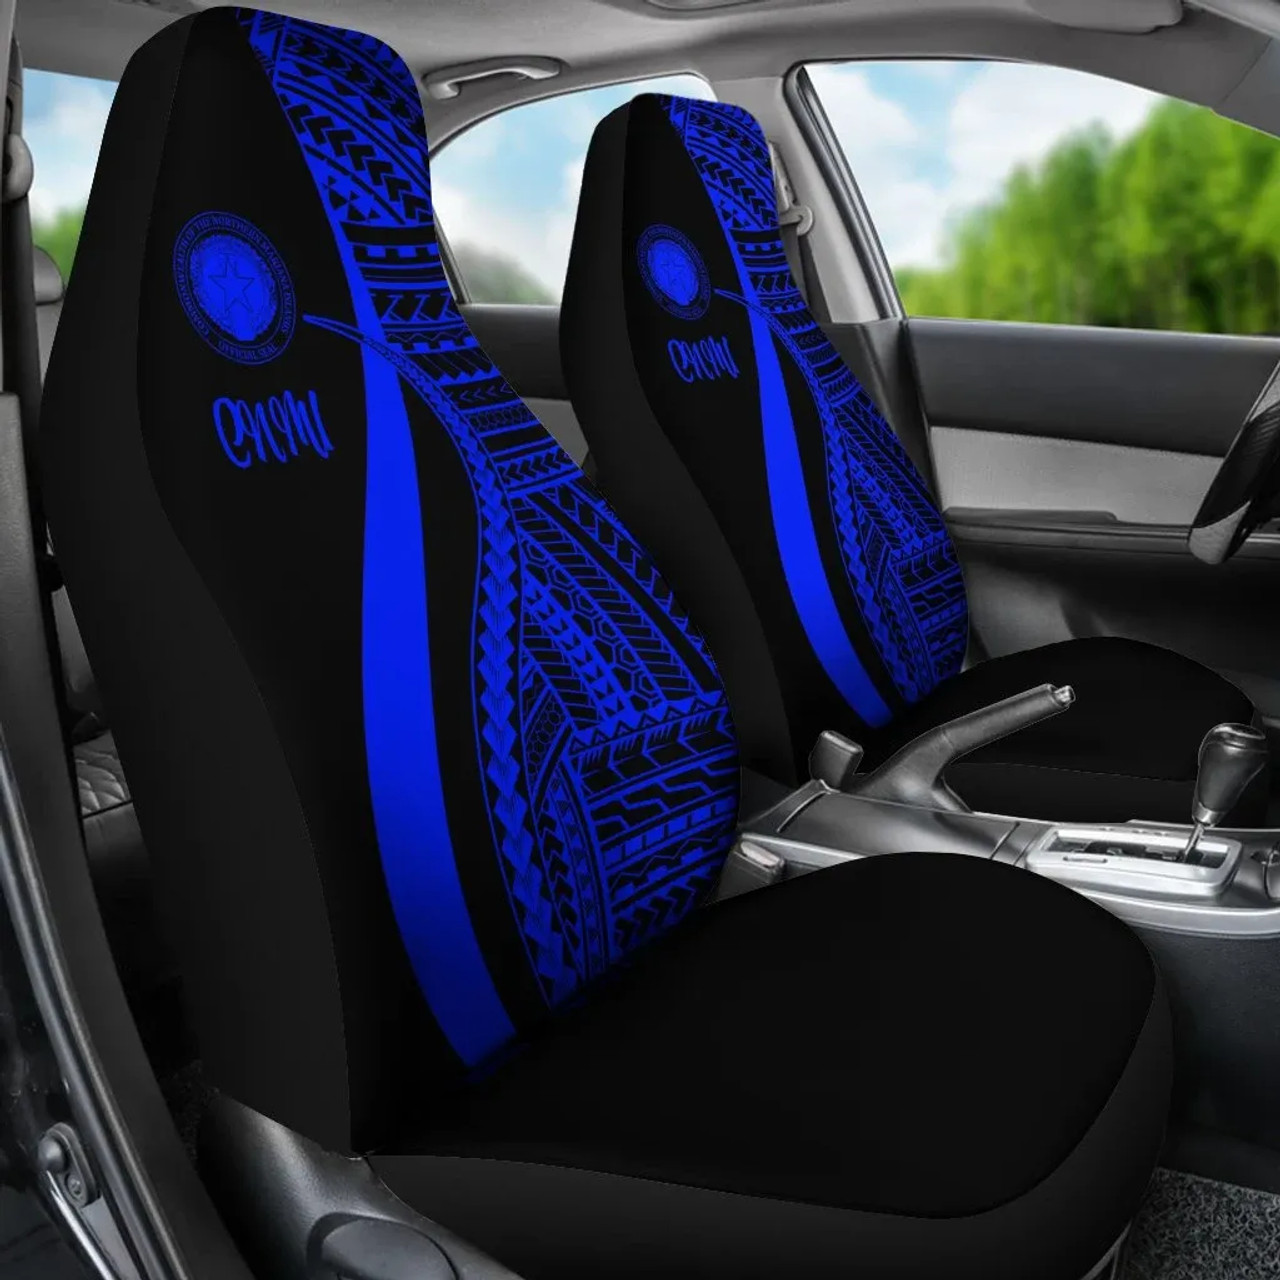 Northern Mariana Islands Car Seat Covers - Blue Polynesian Tentacle Tribal Pattern